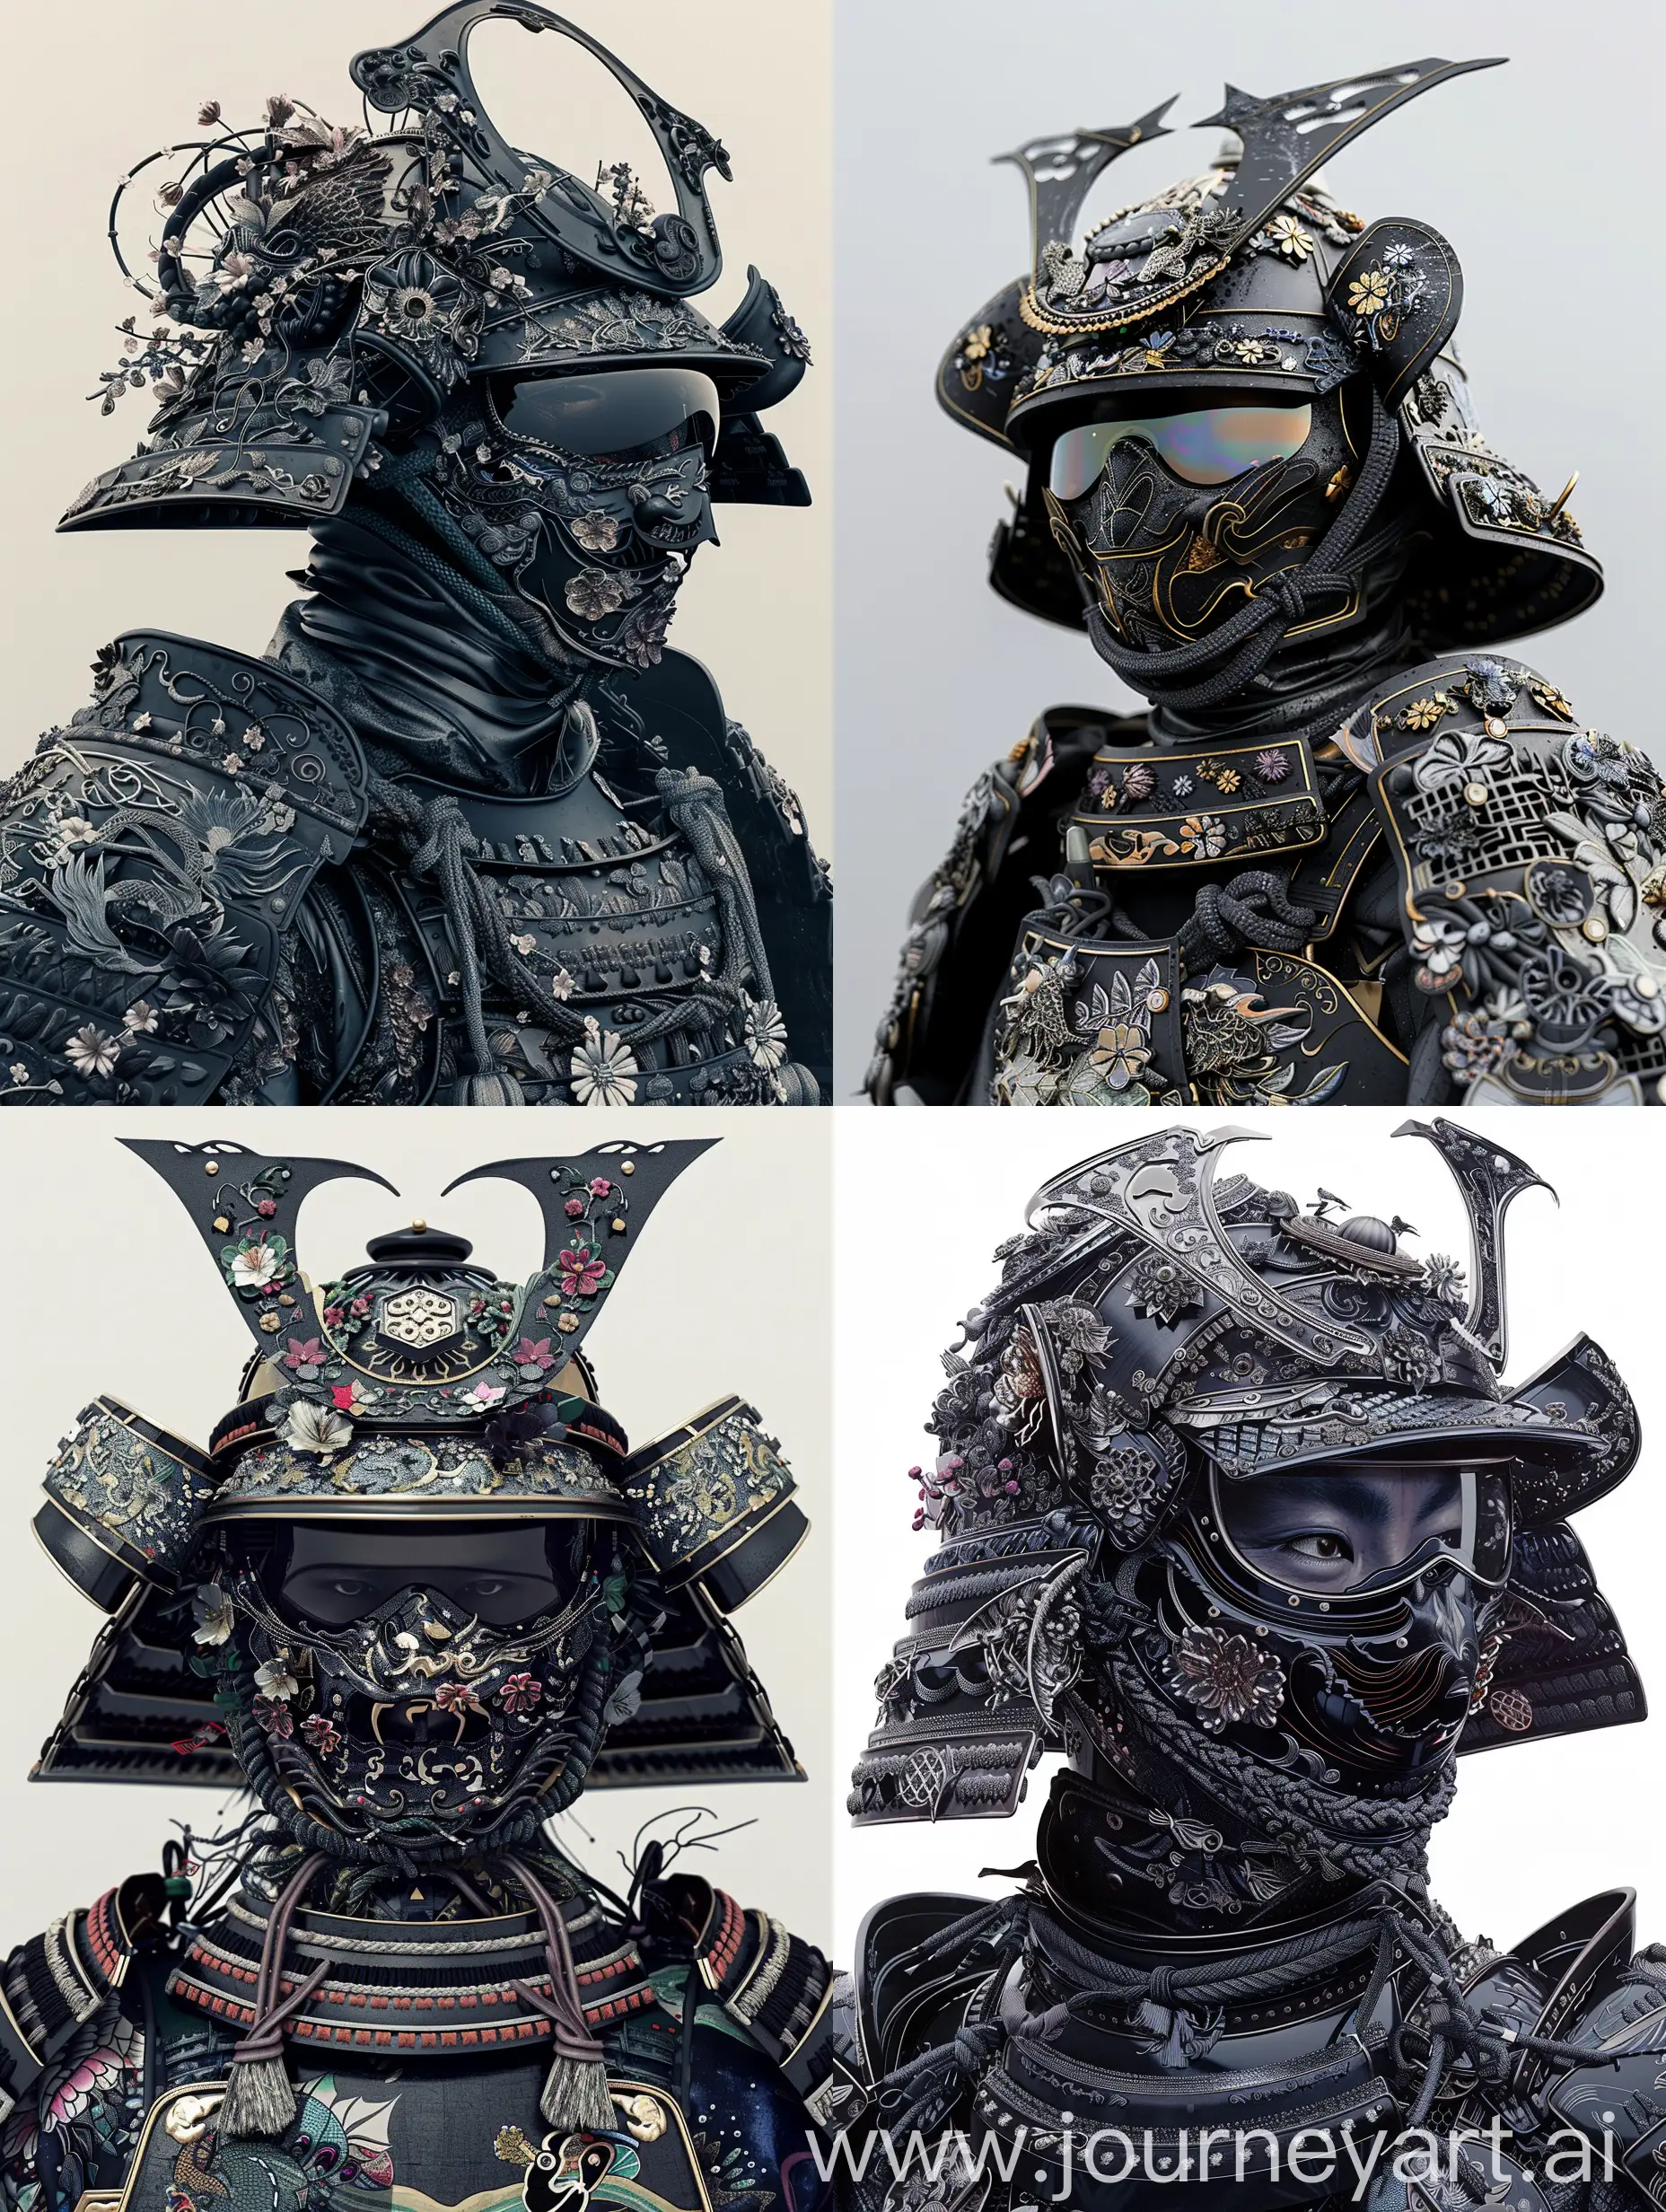 A highly detailed and ornate samurai warrior wears an elaborate suit of armor in various shades of Black. The helmet features intricate decorations with japanese floral elements, a large, curved crest and detailed embellishments. The mask and armor plates are adorned with delicate patterns, including flowers and dragons, and the samurai's face is partially hidden behind tinted goggles. The overall color scheme is predominantly Black, creating a visually striking and unique look. The background is a plain defensive arc